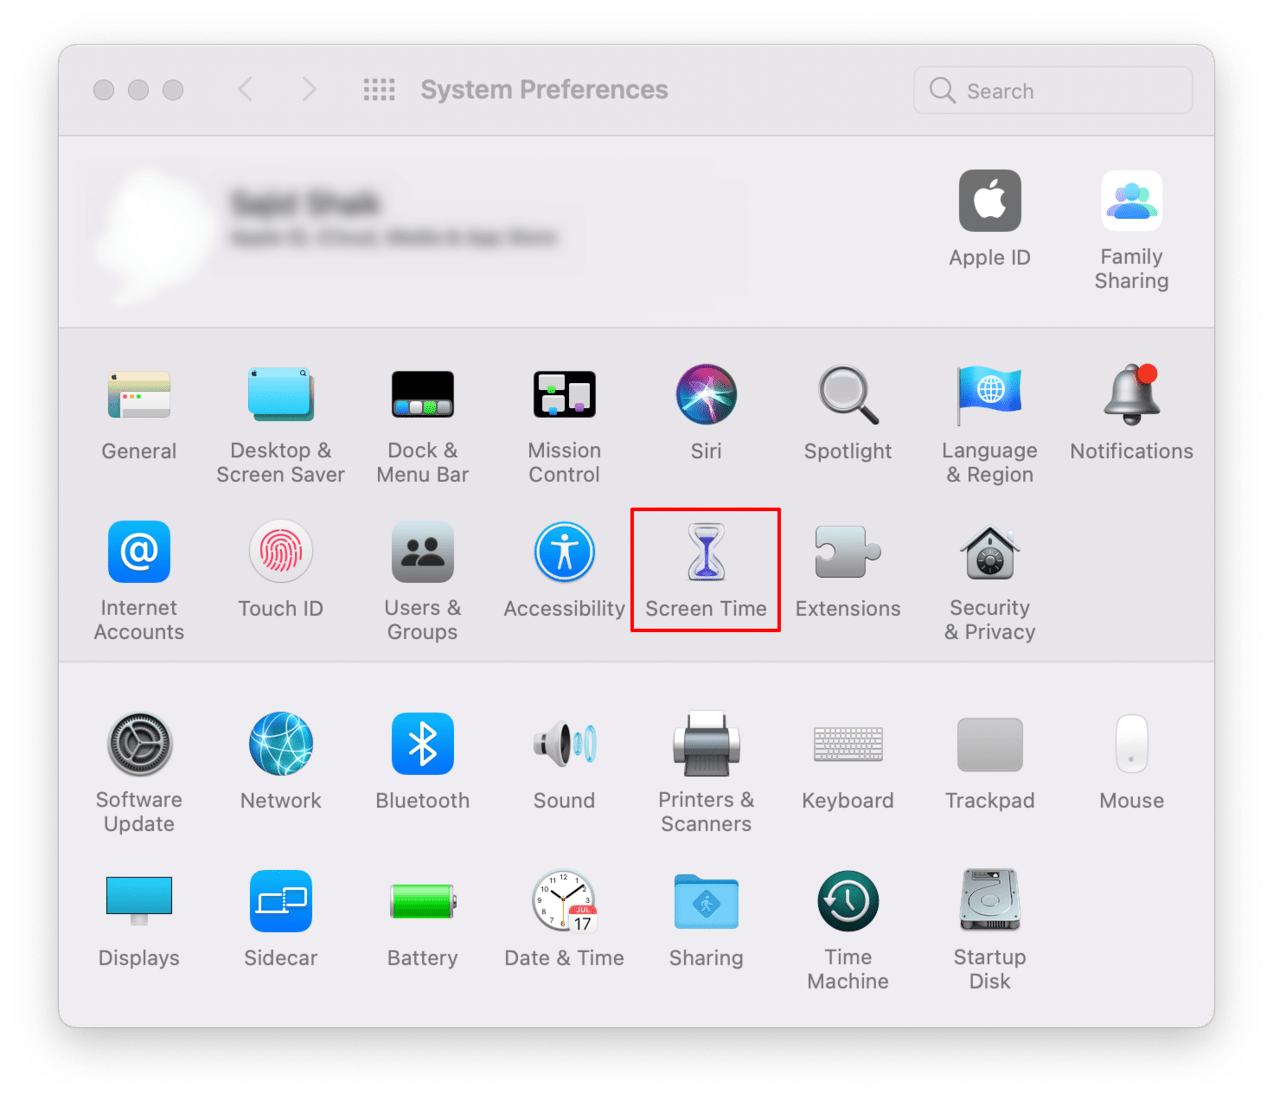 Screen Time under System Preferences